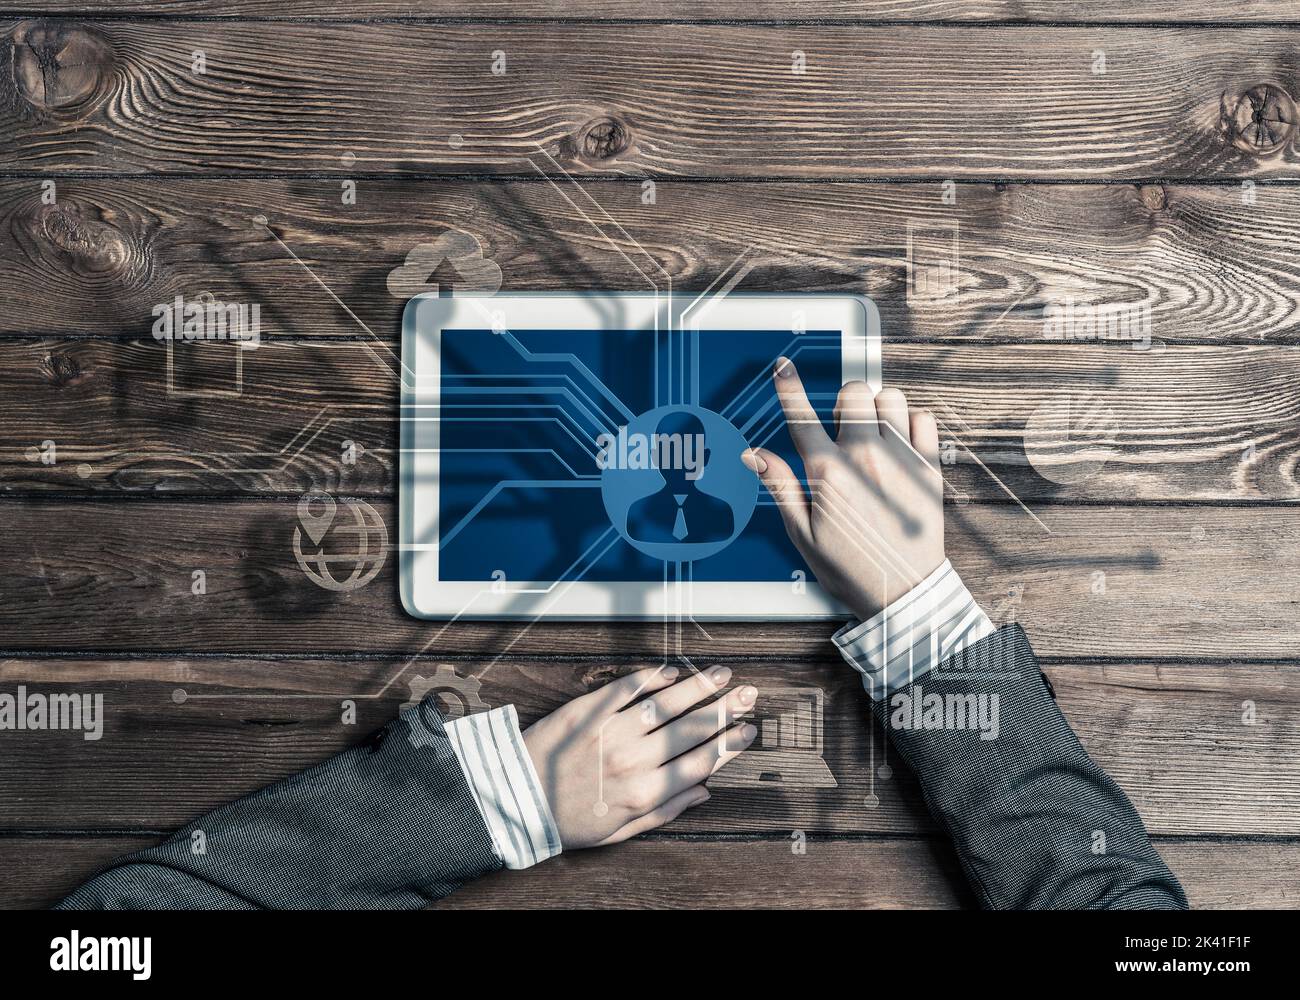 Business workplace with tablet device in female hands and media user interface Stock Photo